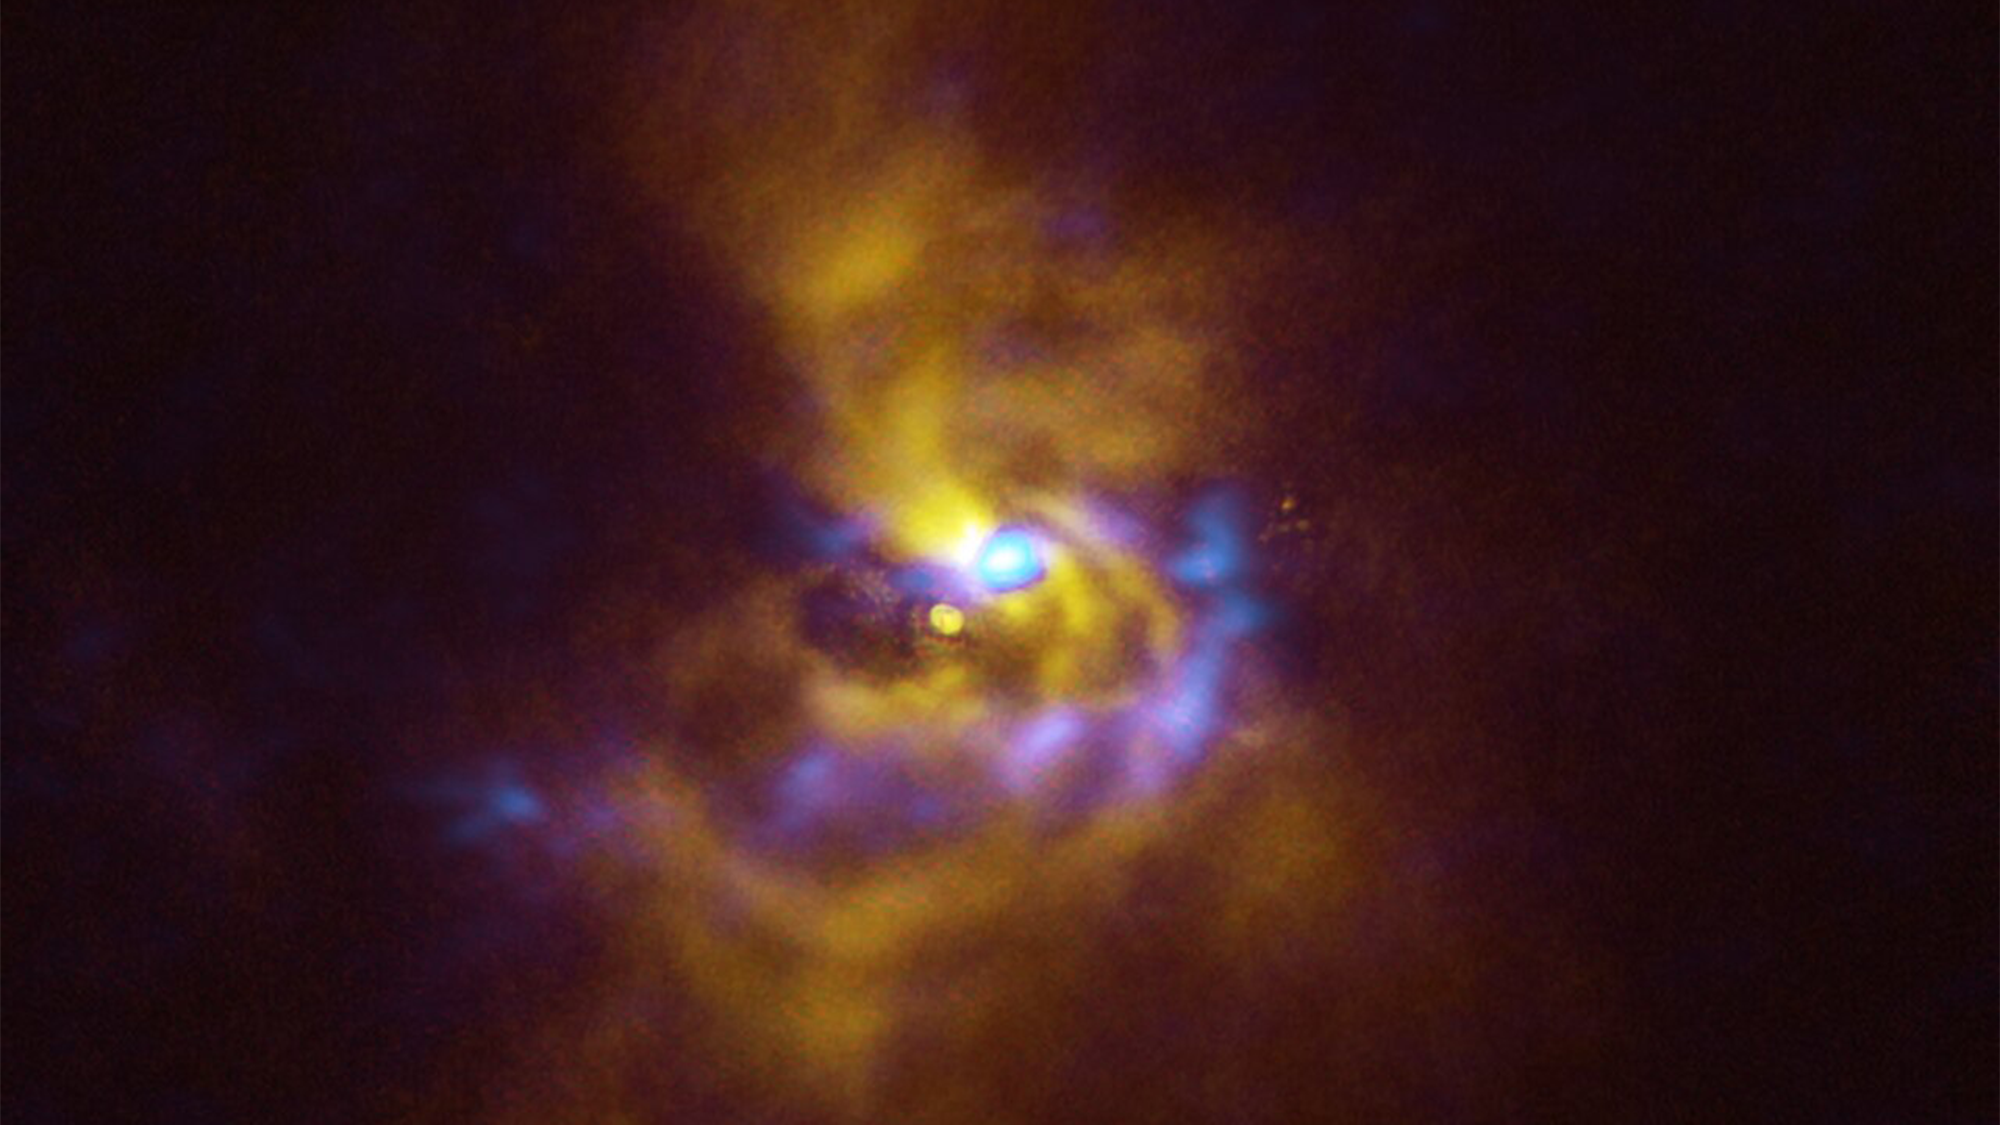 A young star named V960 Mon is at the center, with dusty material with the potential to form planets surrounding it. V960 Mon is located over 5000 light-years away from Earth in the constellation Monoceros.